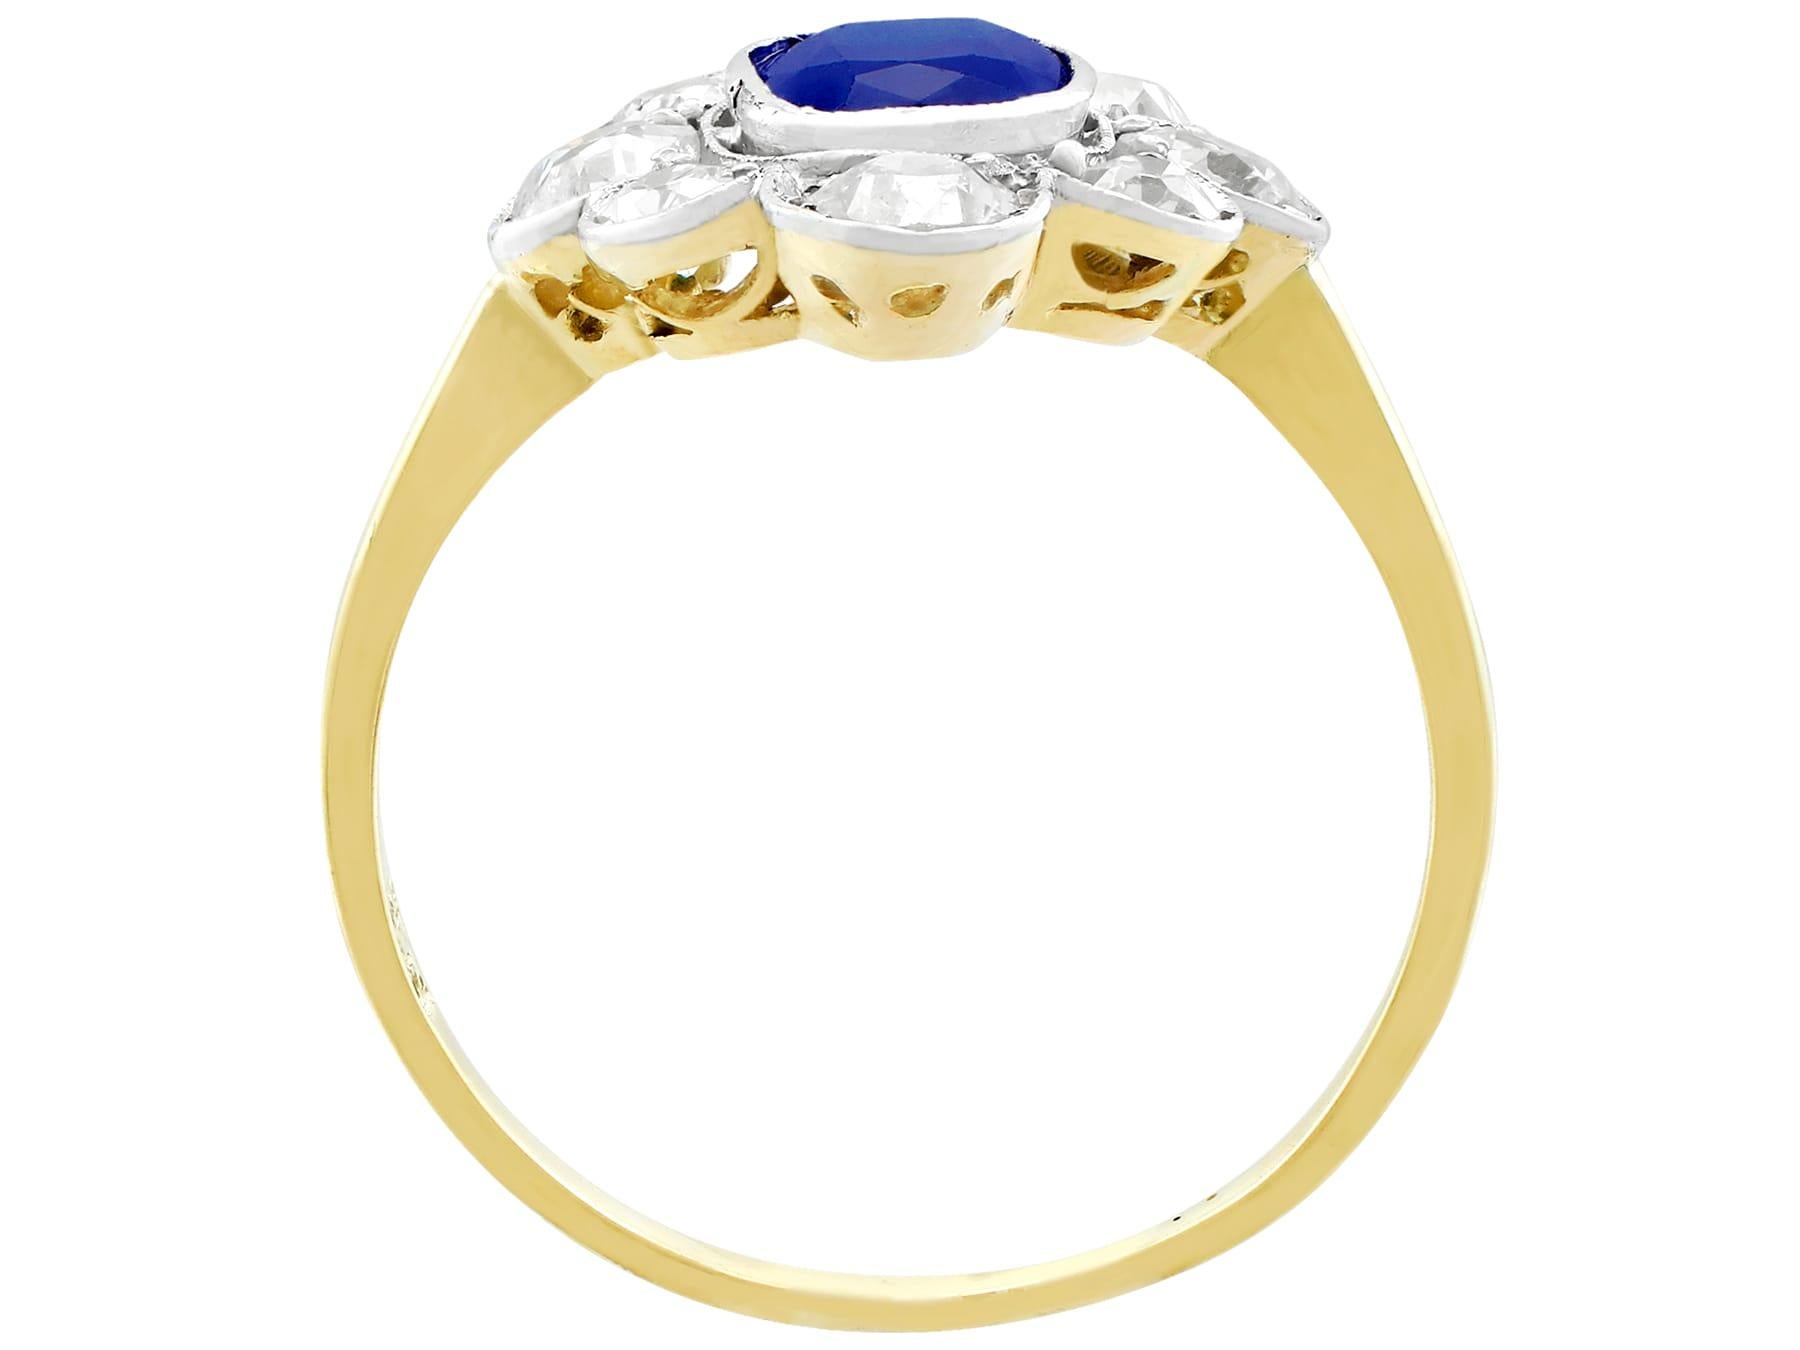 1930s Antique 1.70 Carat Sapphire and 2.10 Carat Diamond Gold Cluster Ring In Excellent Condition For Sale In Jesmond, Newcastle Upon Tyne